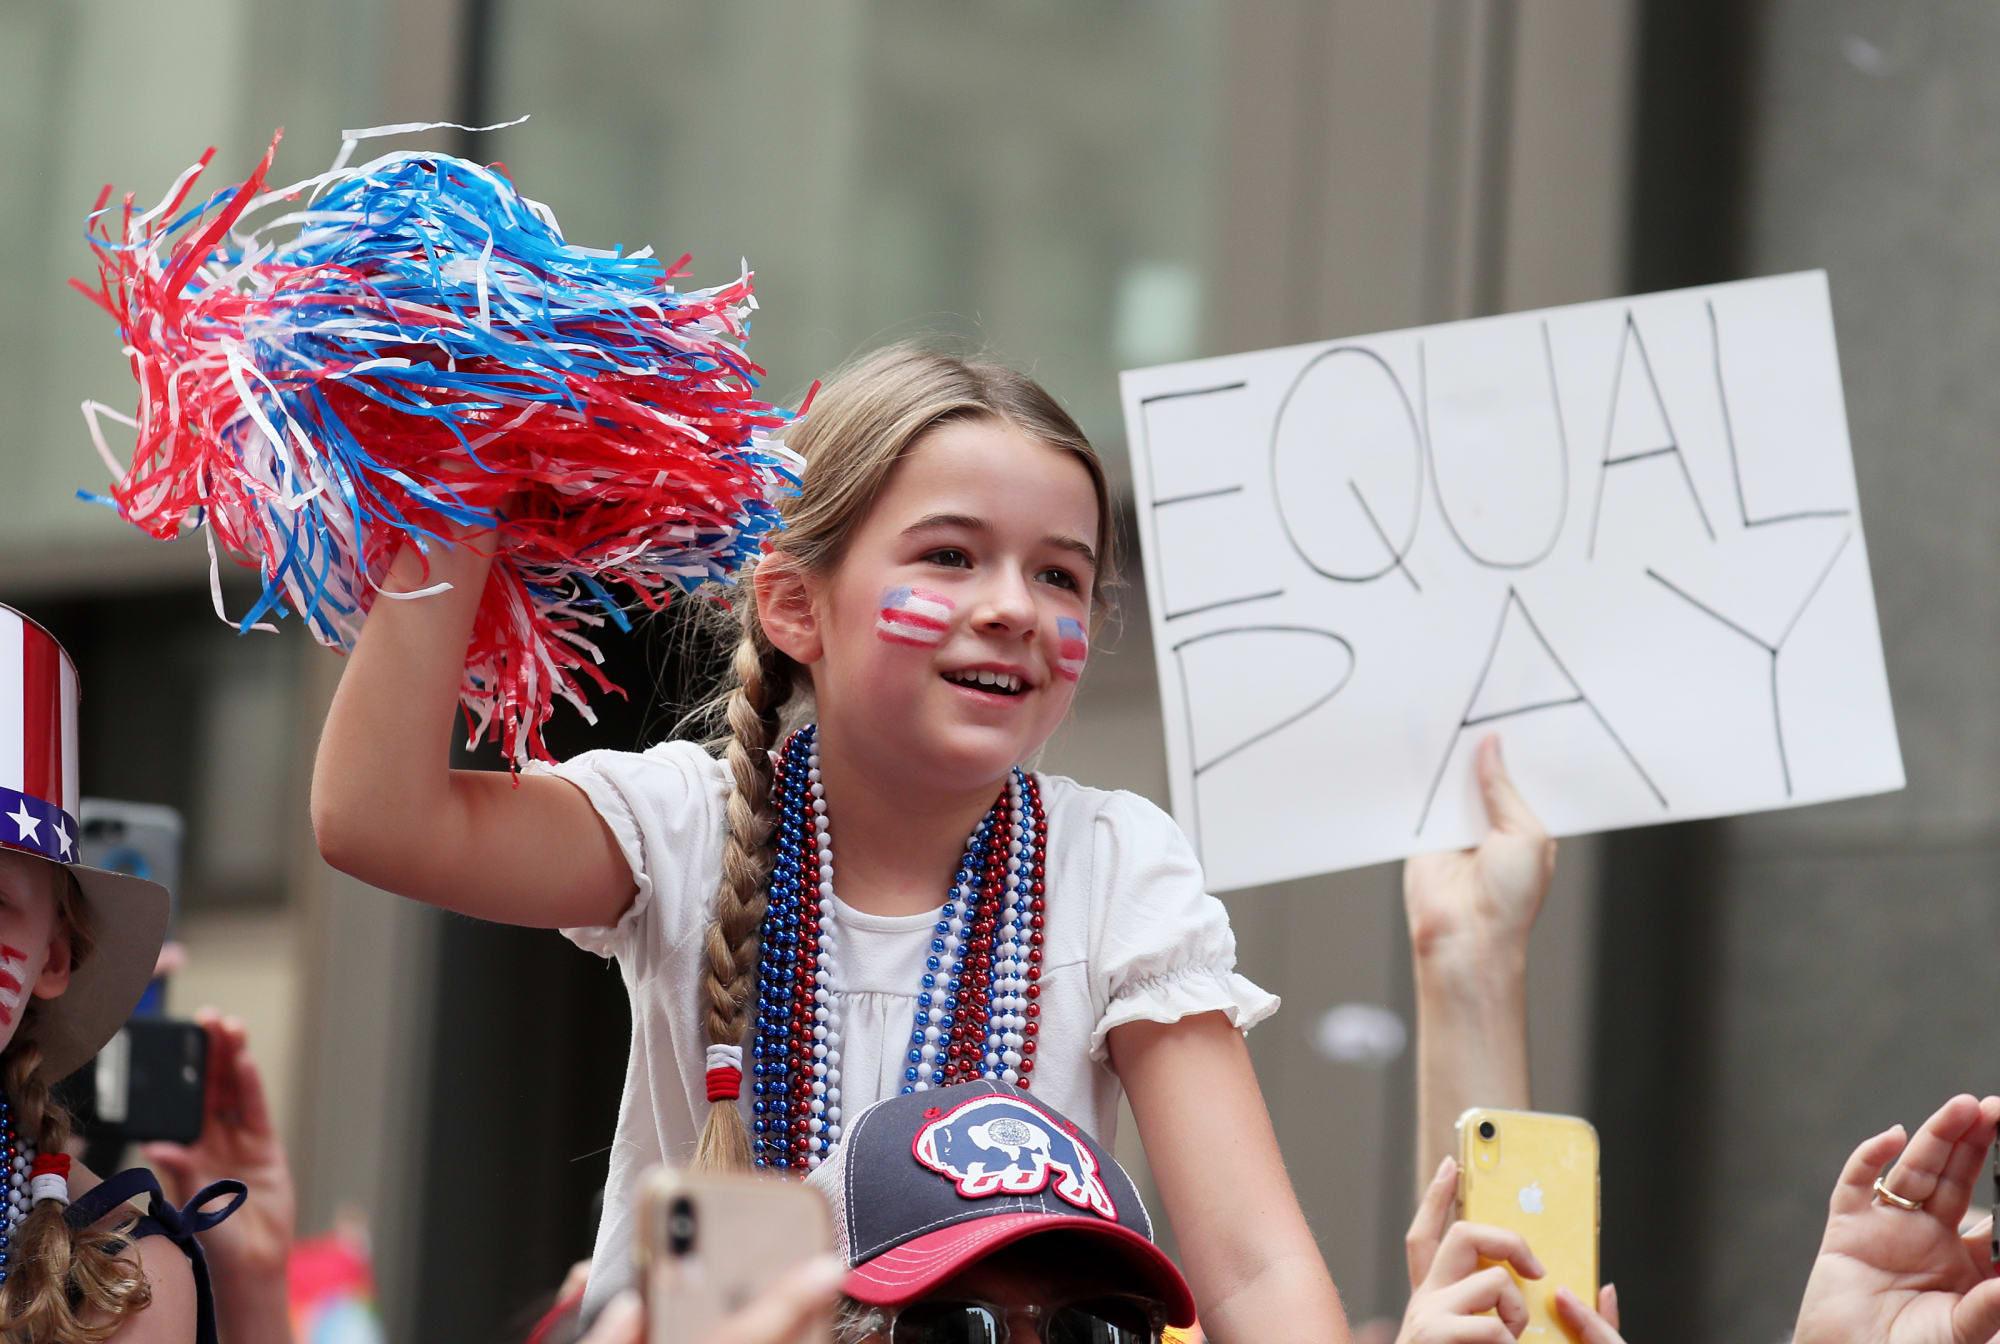 Uswnt Used Their Equal Pay Lawsuit As Confetti For World Cup Parade